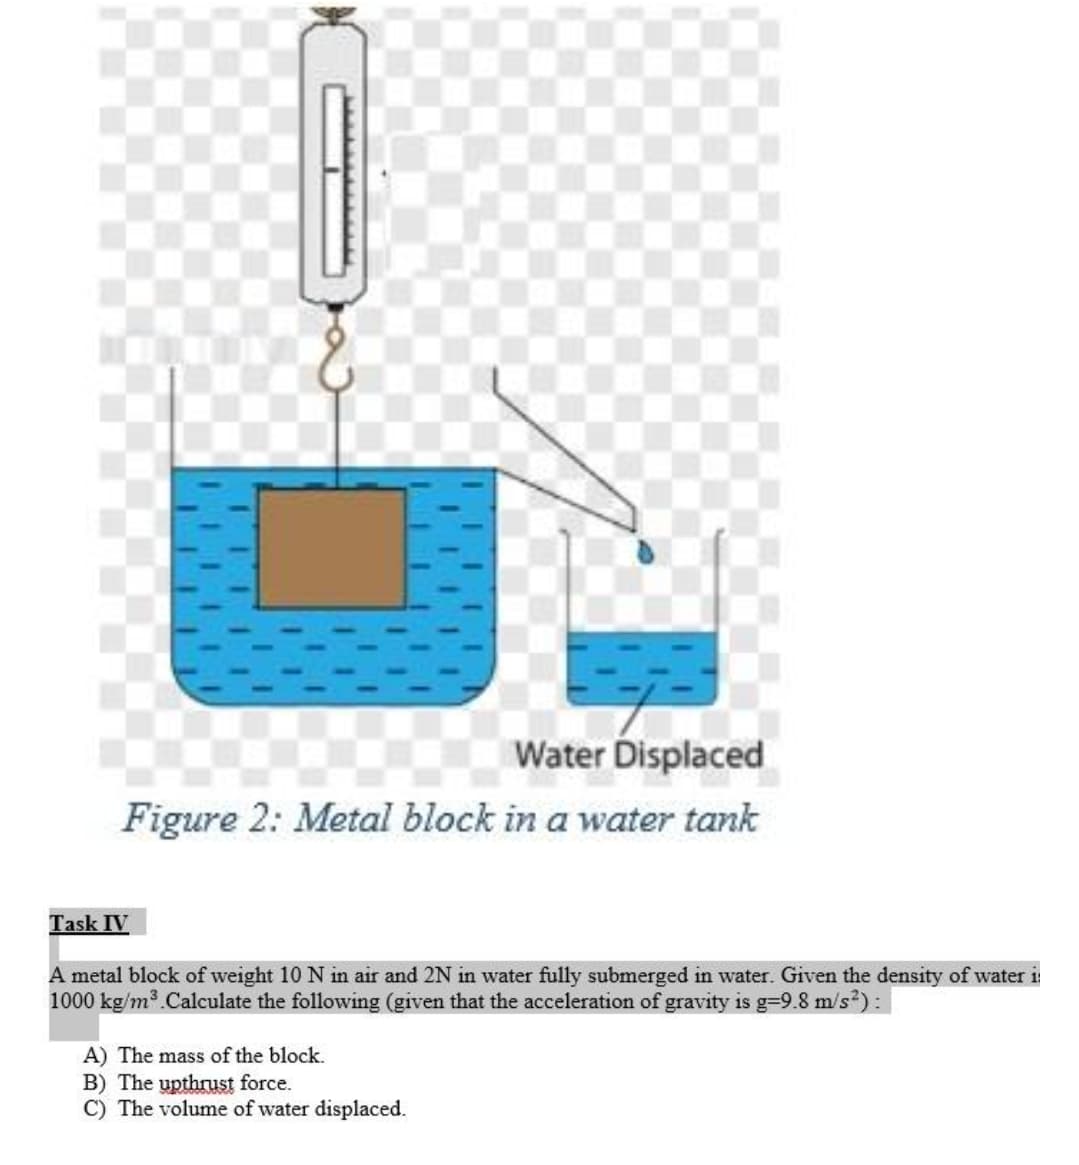 Water Displaced
Figure 2: Metal block in a water tank
Task IV
A metal block of weight 10 N in air and 2N in water fully submerged in water. Given the density of water i
1000 kg/m.Calculate the following (given that the acceleration of gravity is g=9.8 m/s?):
A) The mass of the block.
B) The upthrust force.
C) The volume of water displaced.
